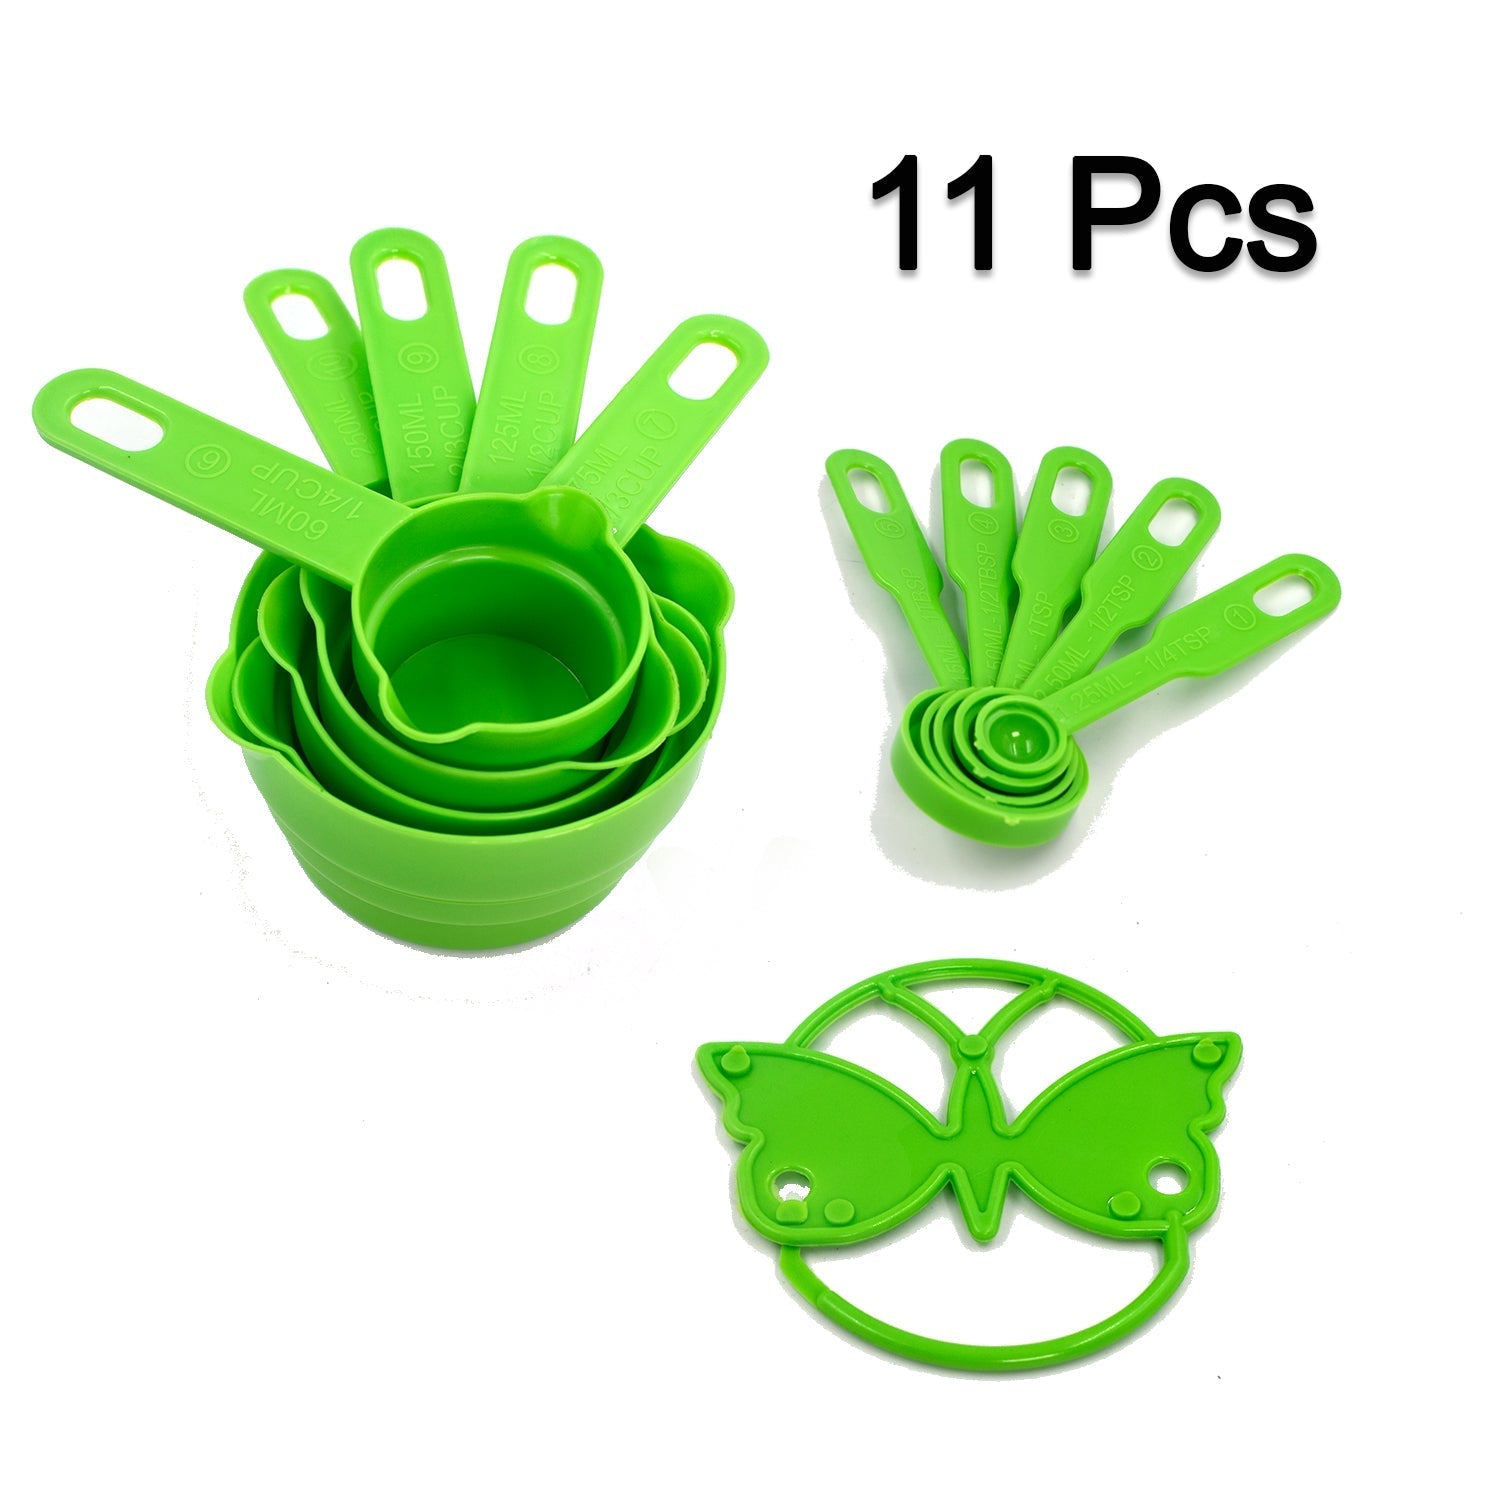 2646 G 11 Pc Measuring Cup Set For Pouring And Picking Of Various Food Items And All With Nice Measurements. DeoDap